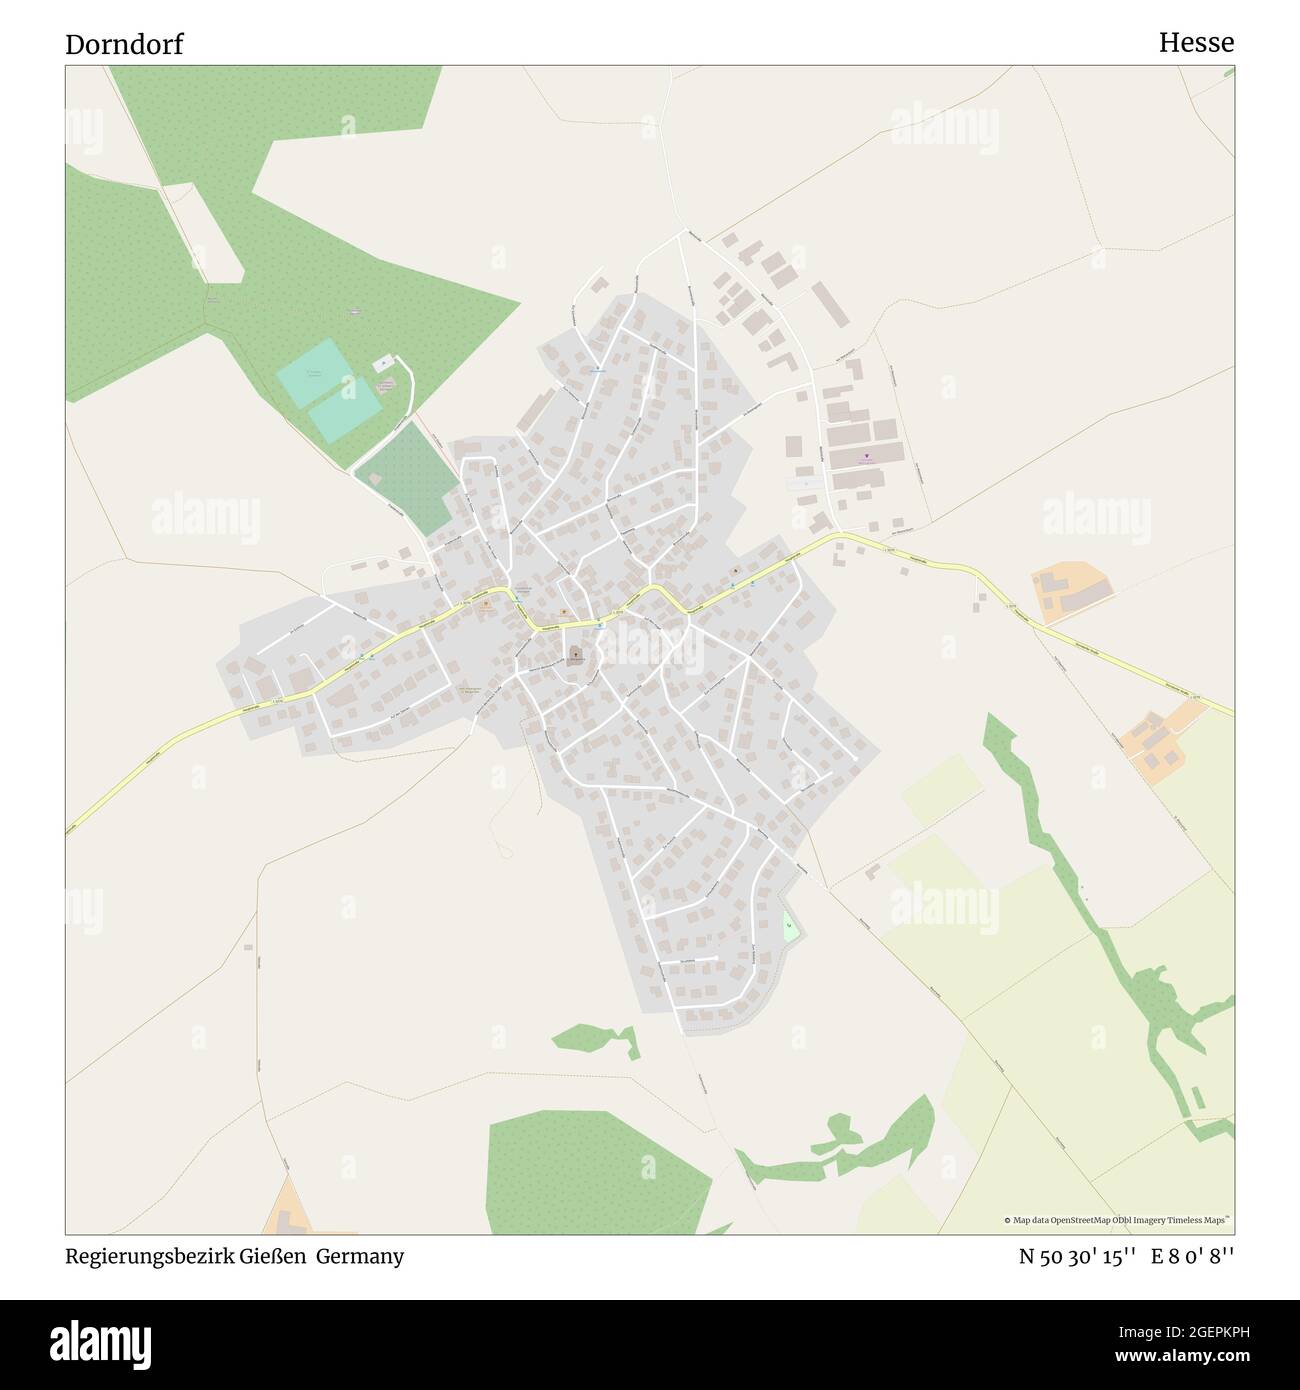 Dorndorf, Regierungsbezirk Gießen, Germany, Hesse, N 50 30' 15'', E 8 0' 8'', map, Timeless Map published in 2021. Travelers, explorers and adventurers like Florence Nightingale, David Livingstone, Ernest Shackleton, Lewis and Clark and Sherlock Holmes relied on maps to plan travels to the world's most remote corners, Timeless Maps is mapping most locations on the globe, showing the achievement of great dreams Stock Photo